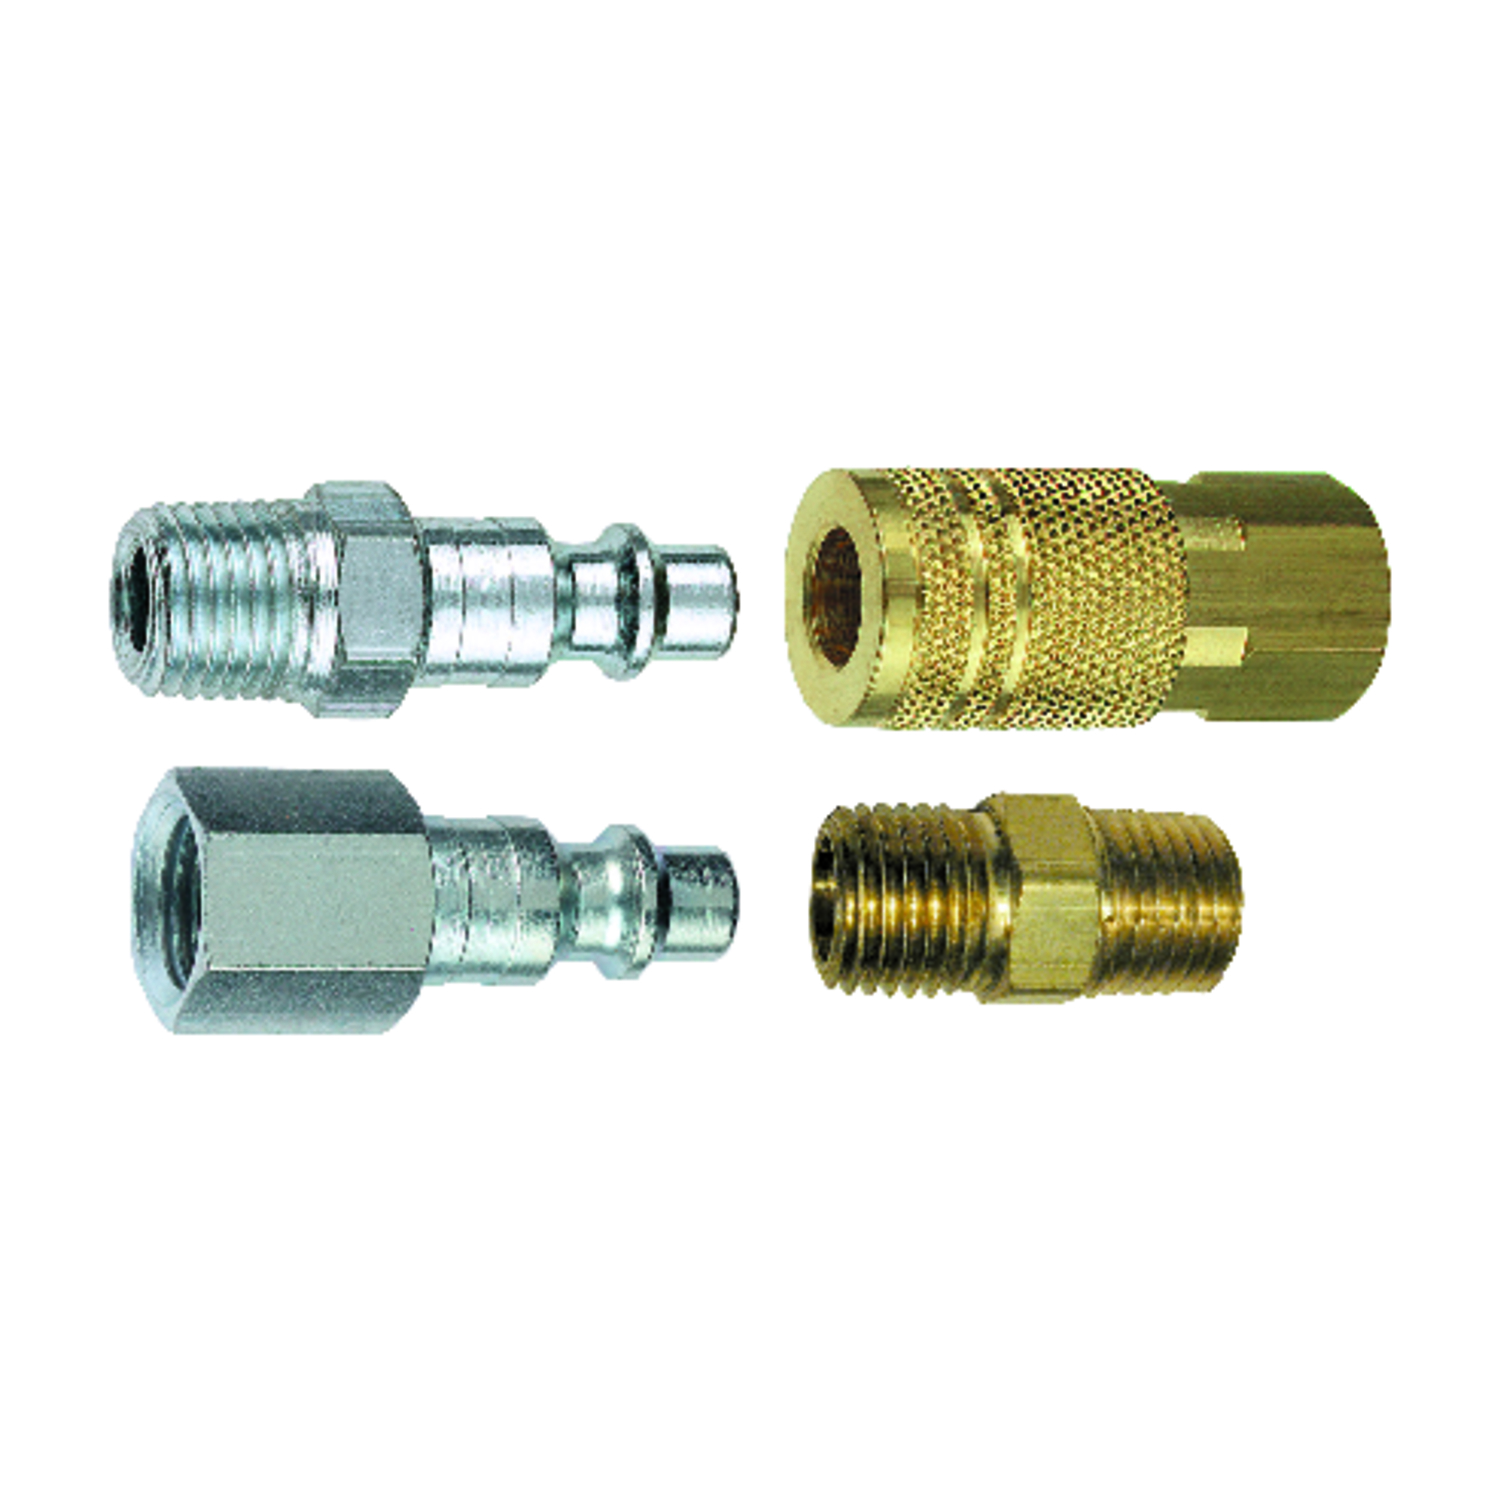 UPC 028893132035 product image for Tru-Flate 1/4 In. NPT Quick Connect Coupler Kit (13203) | upcitemdb.com